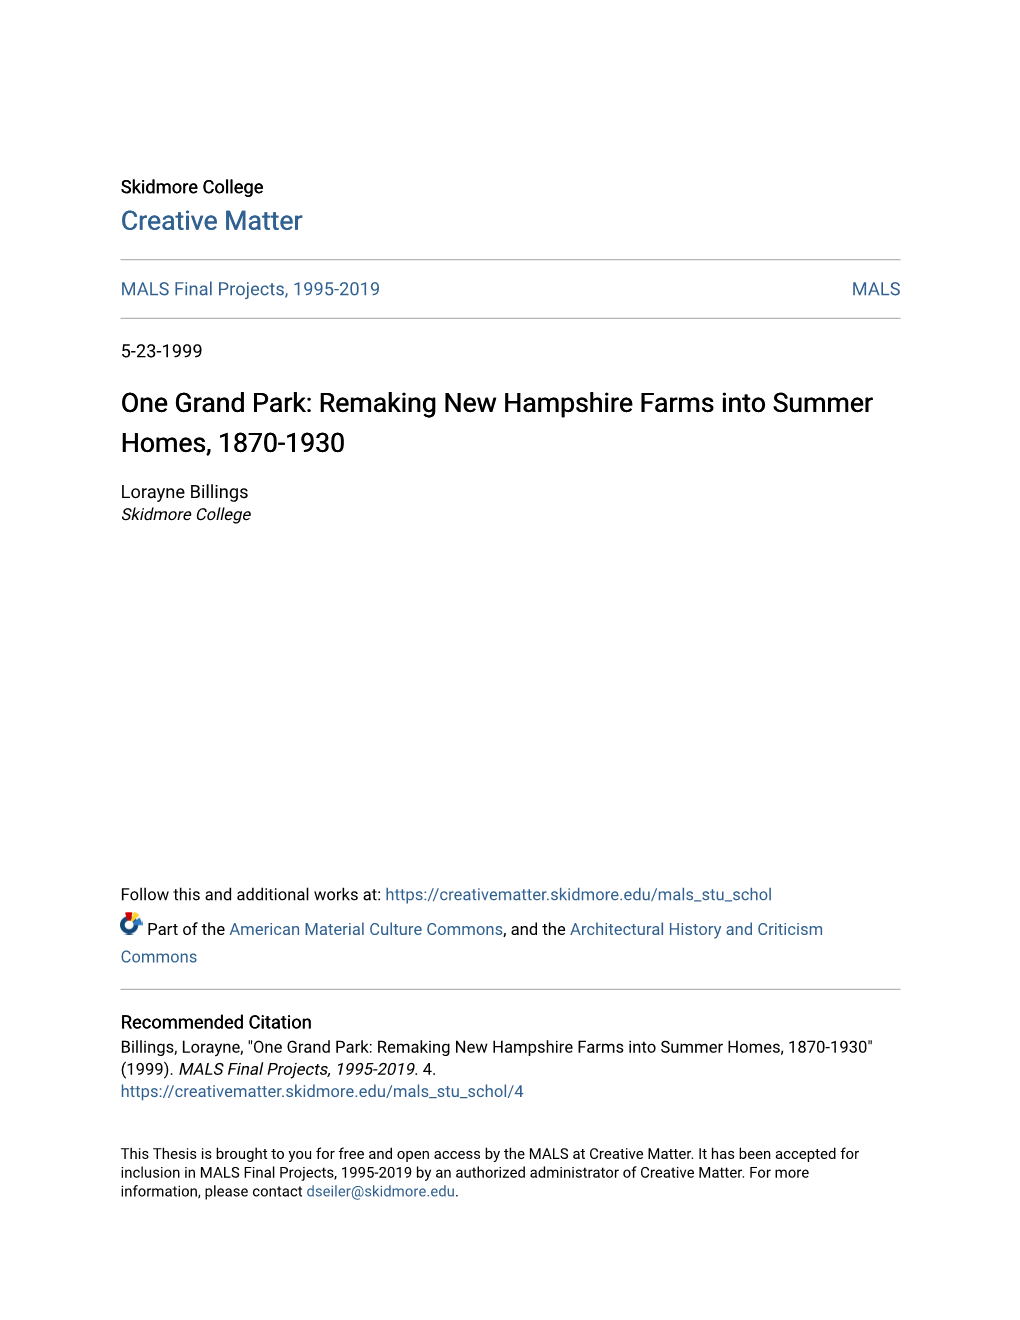 One Grand Park: Remaking New Hampshire Farms Into Summer Homes, 1870-1930